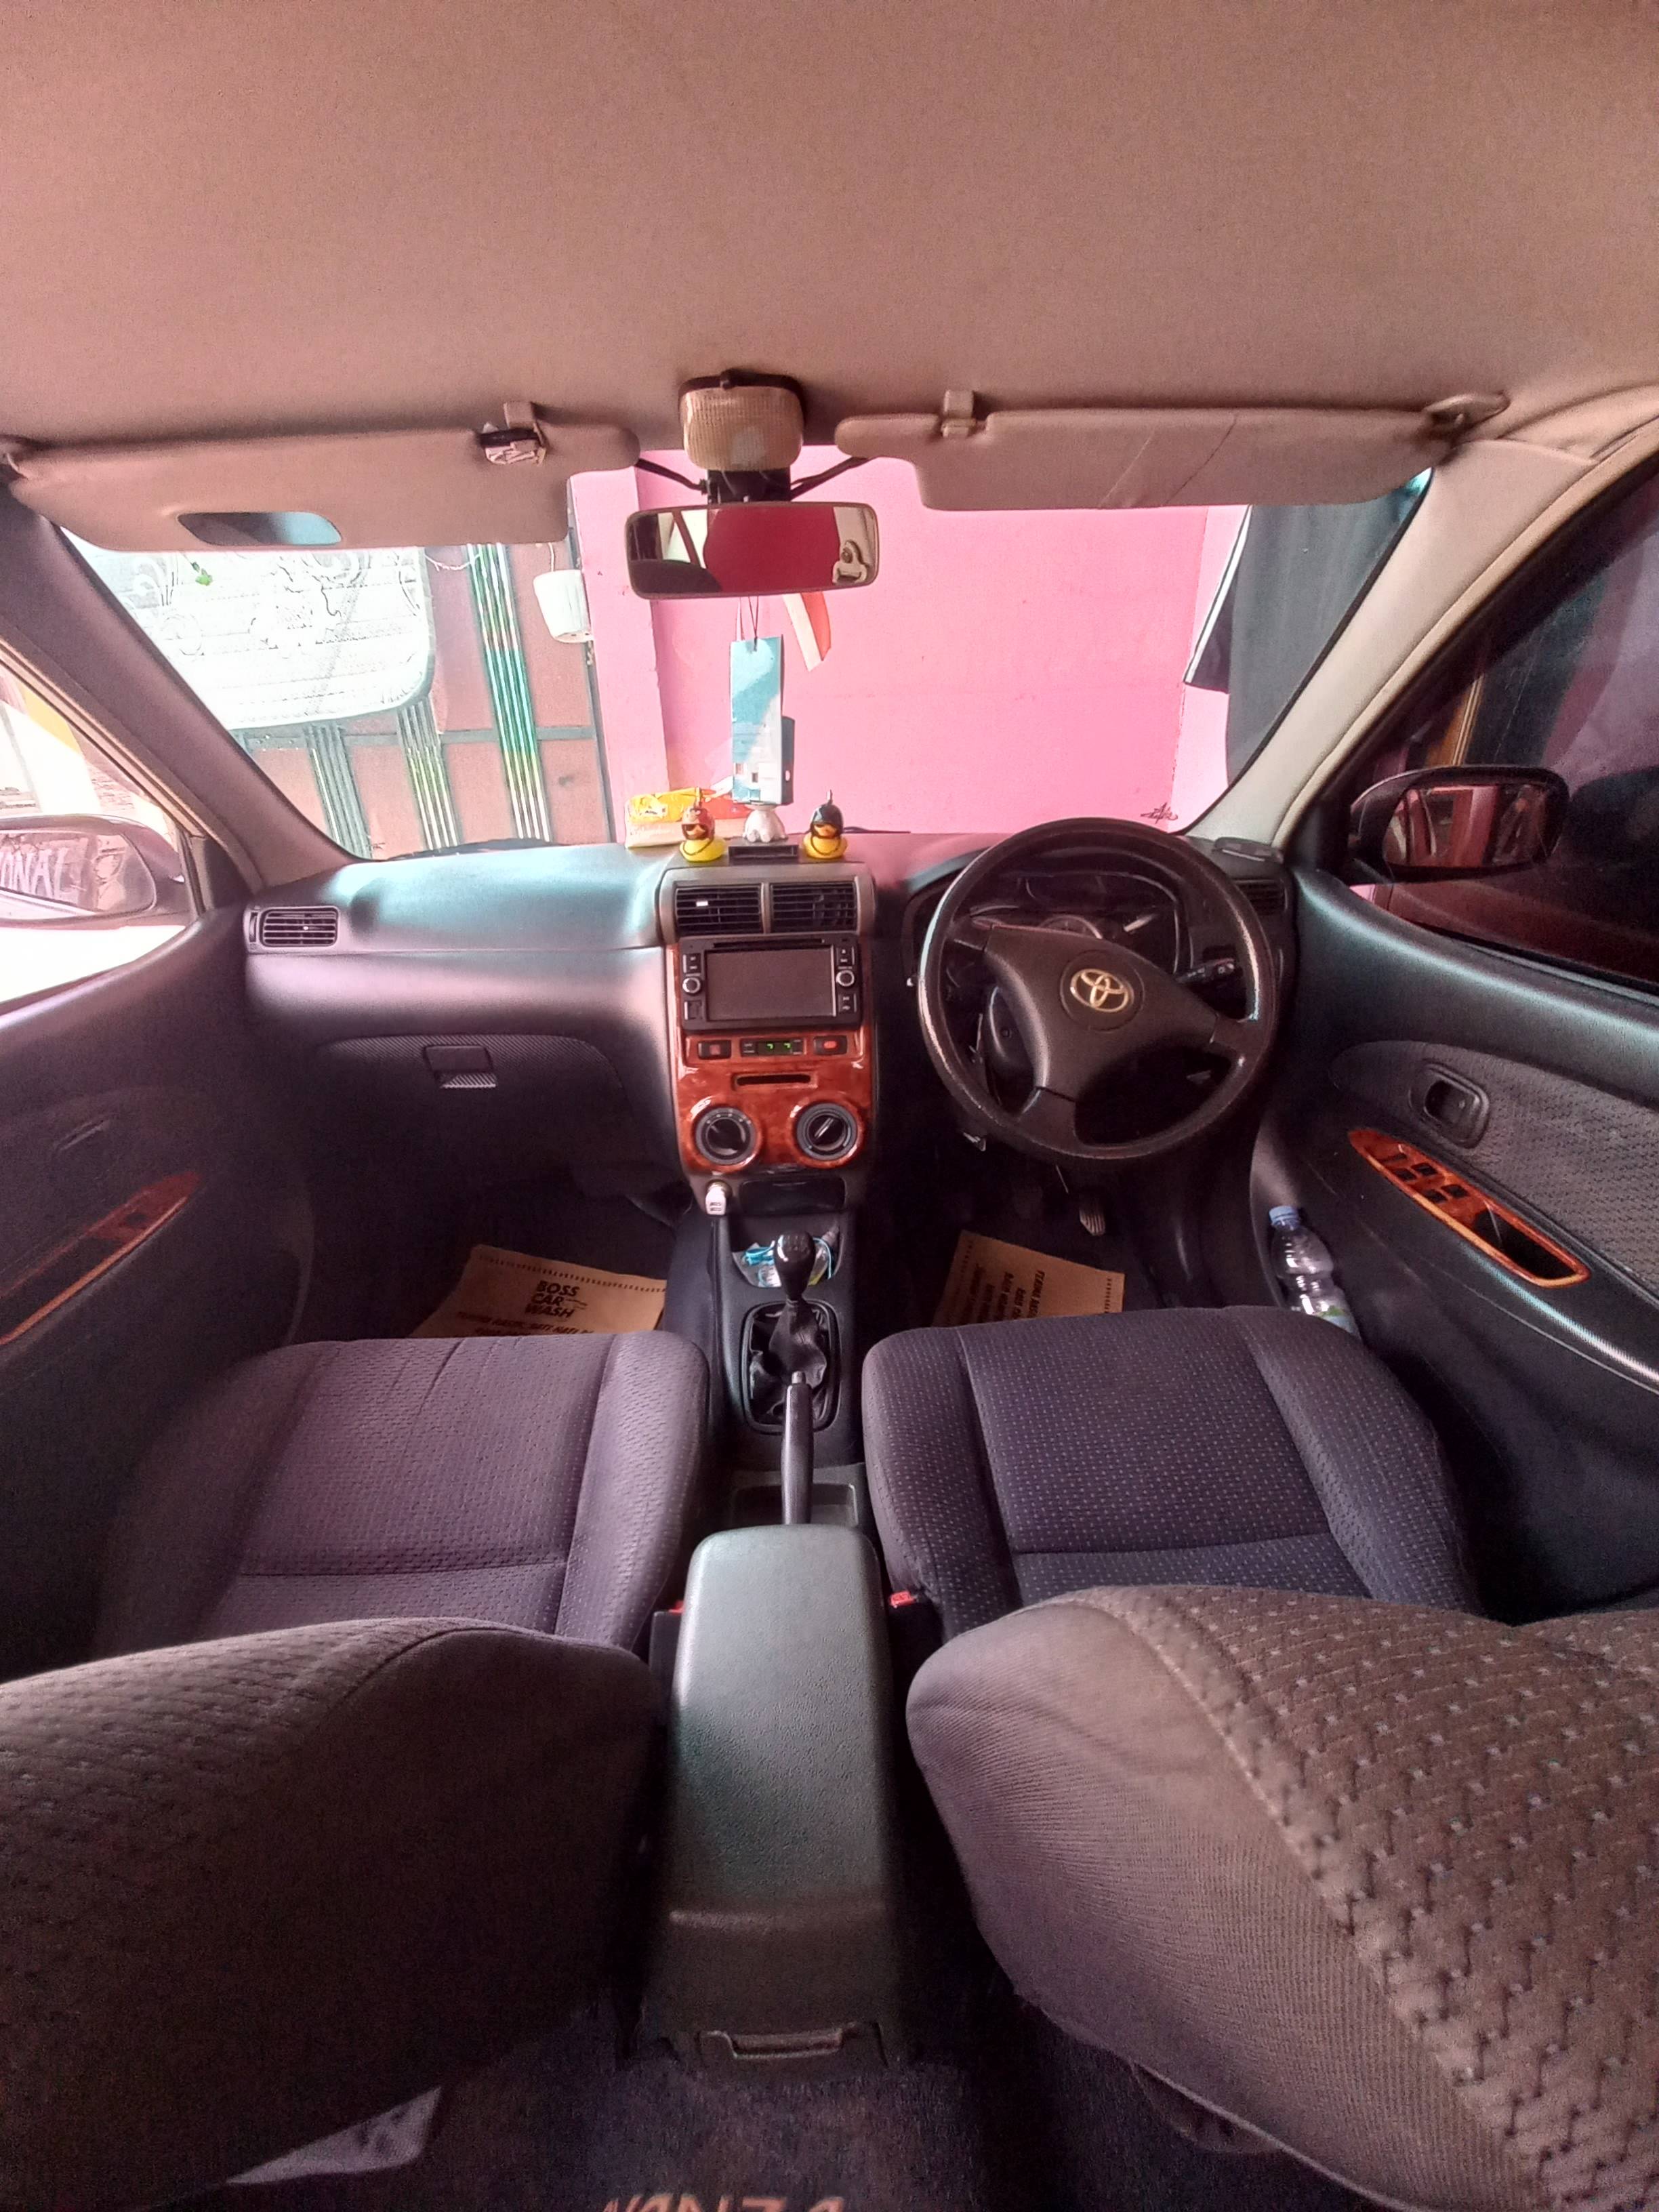 Used 2005 Toyota Avanza 1.3G MT 1.3G MT for sale